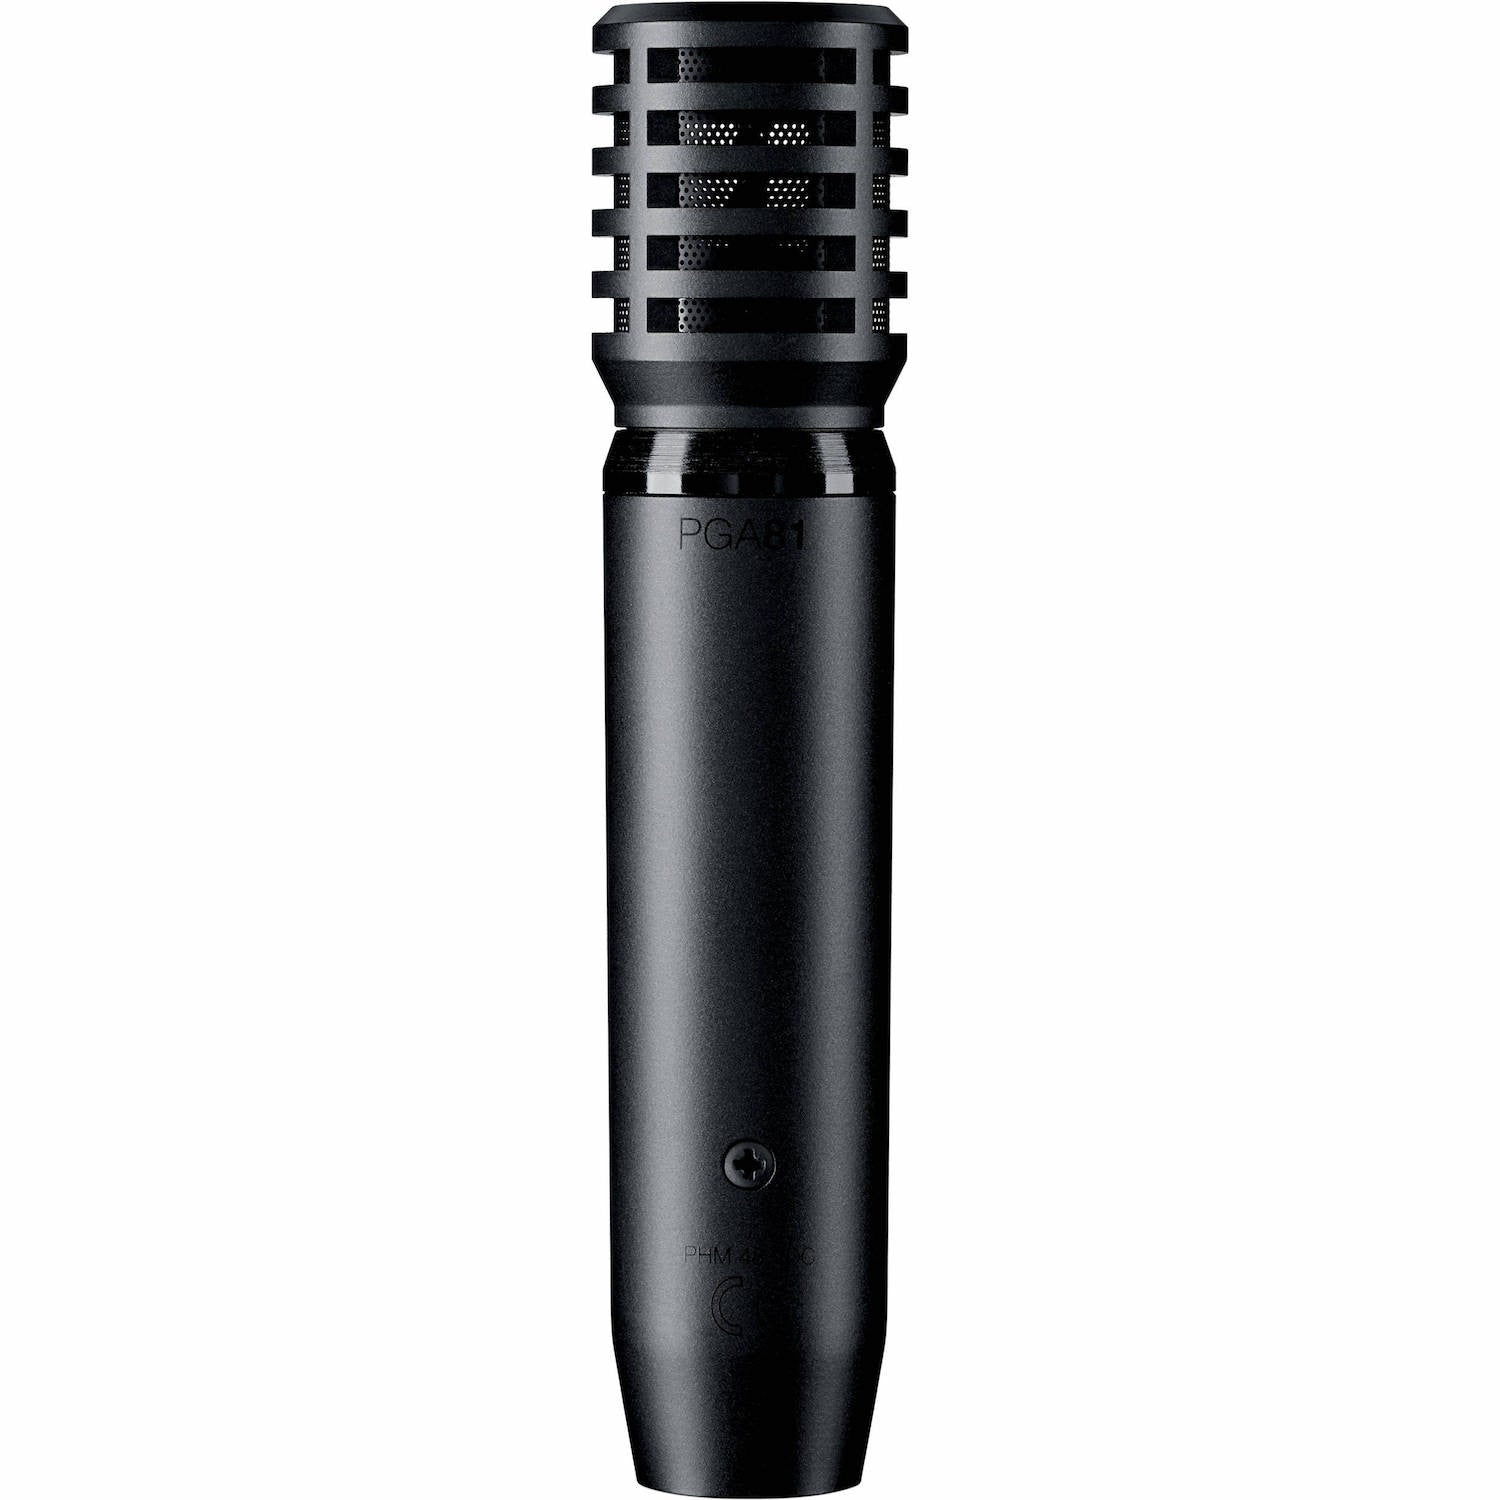 Shure PGA81 Cardioid Condenser Instrument Microphone | Music Experience | Shop Online | South Africa